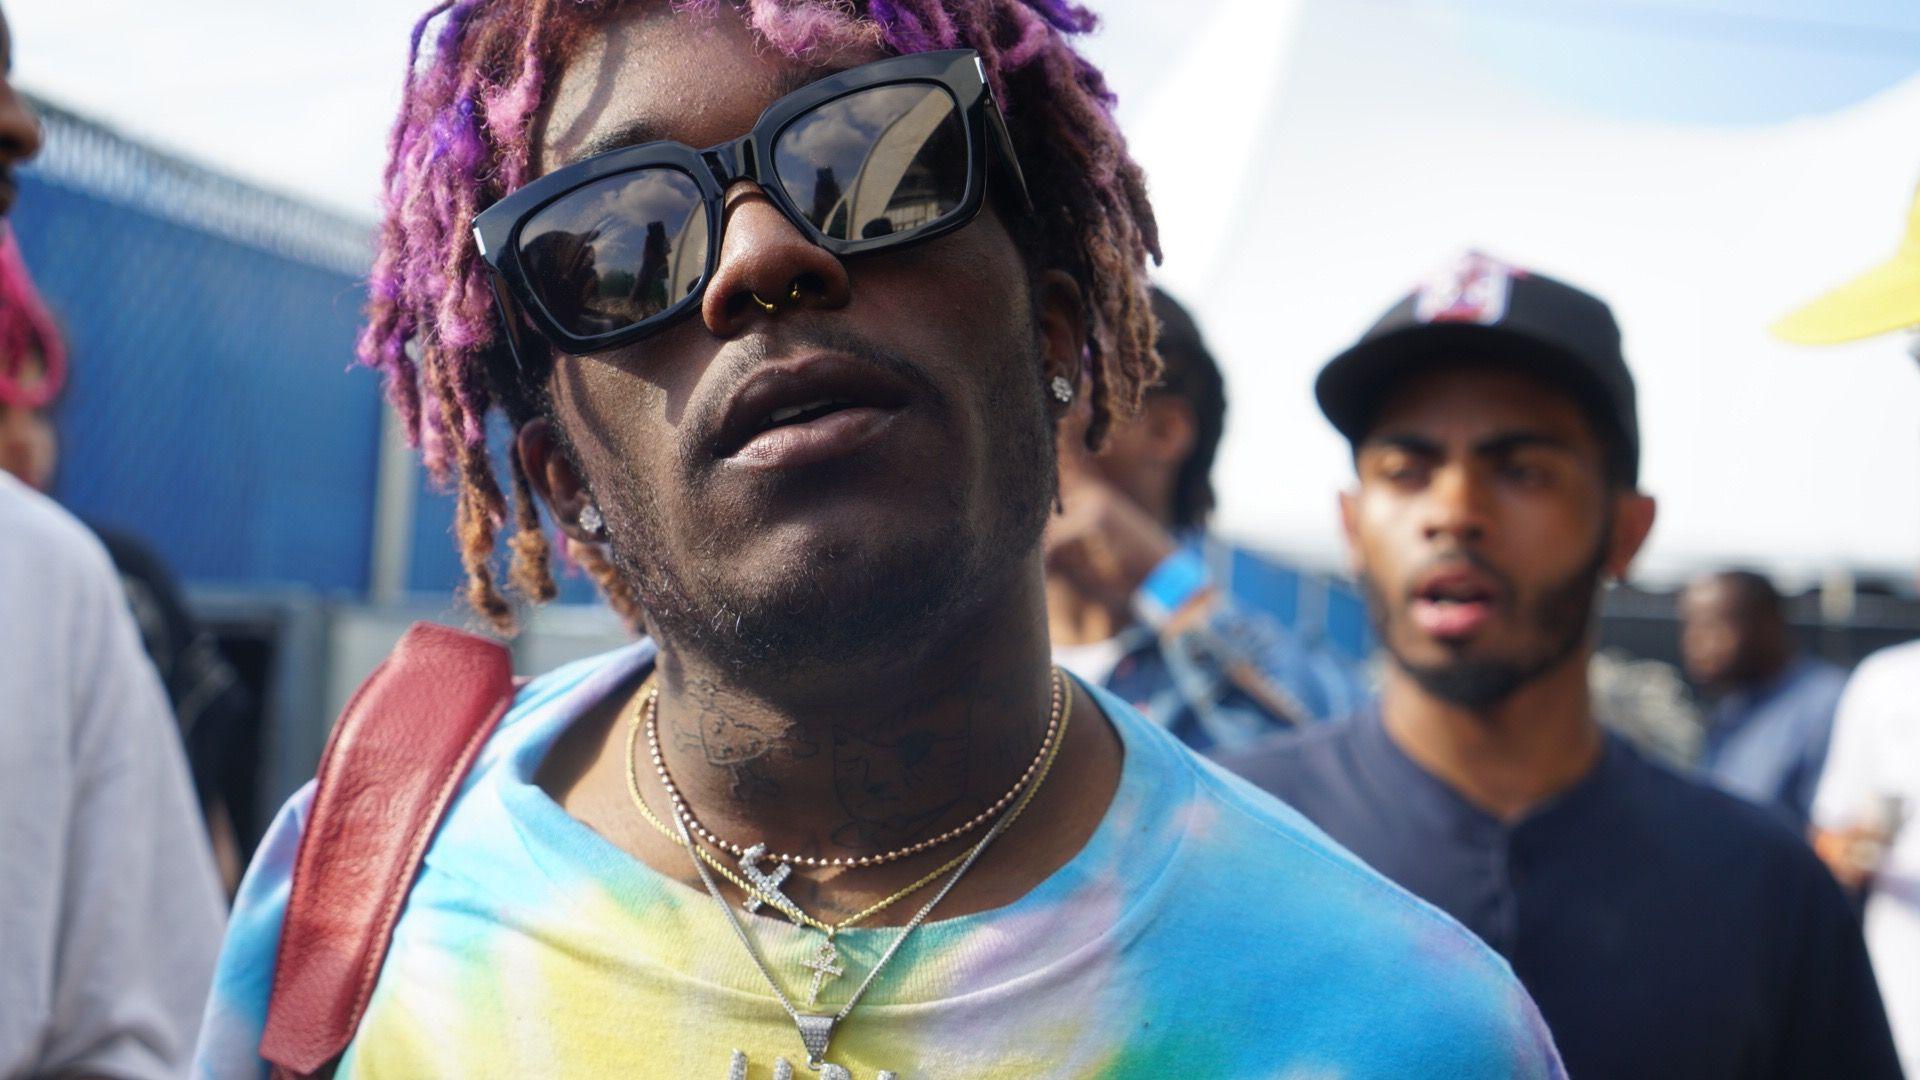 Lil Uzi Vert Wallpaper HD Collection For Free Download